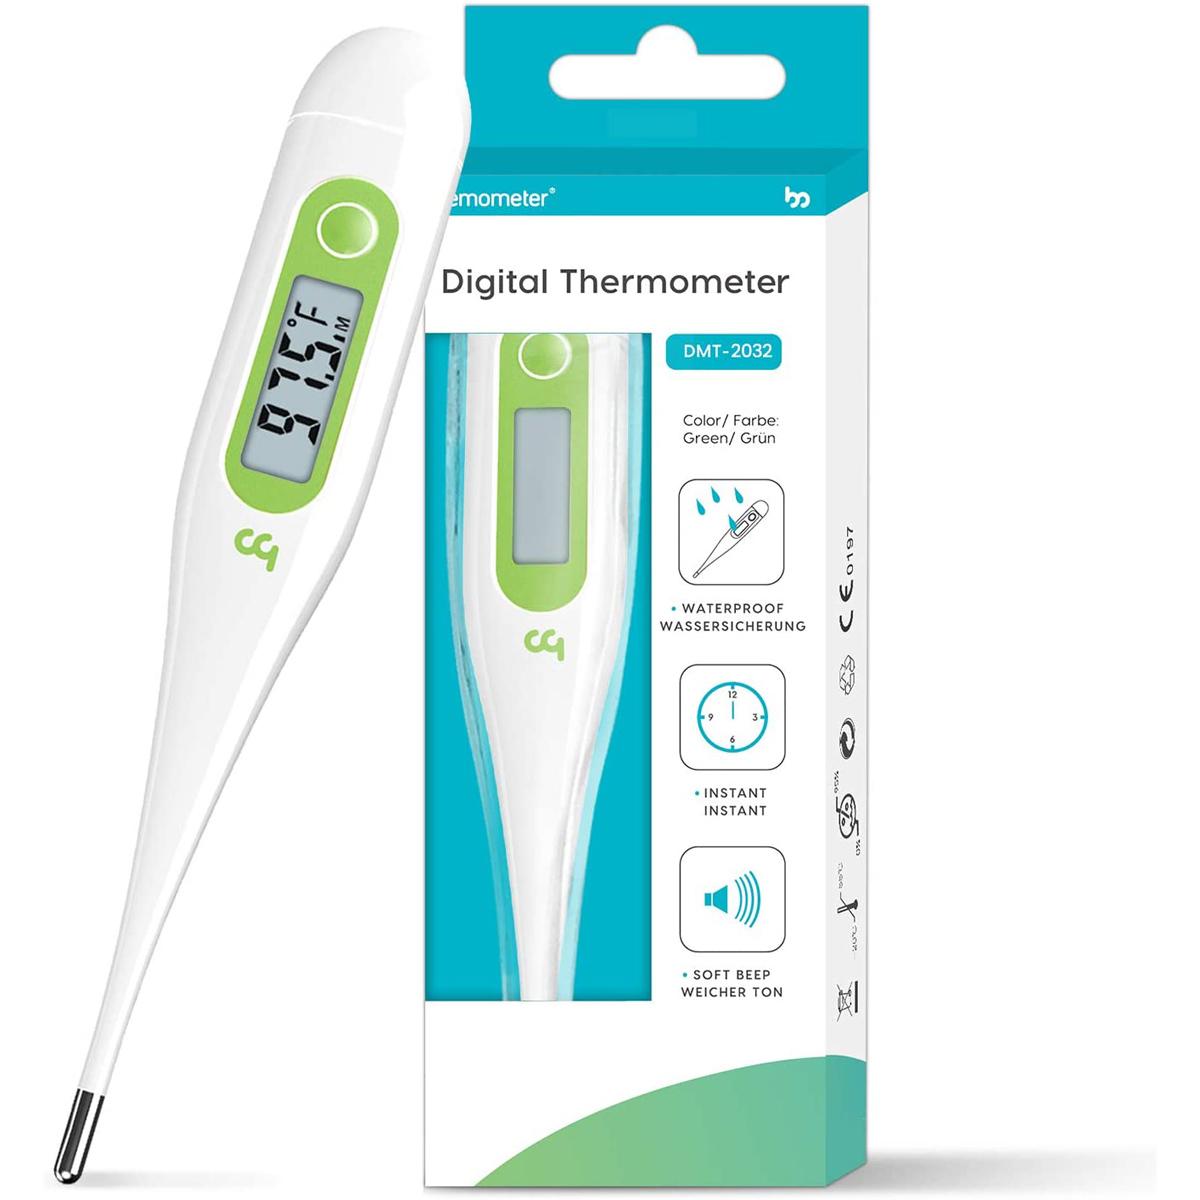 Femometer Oral Digital Thermometer for $2.10